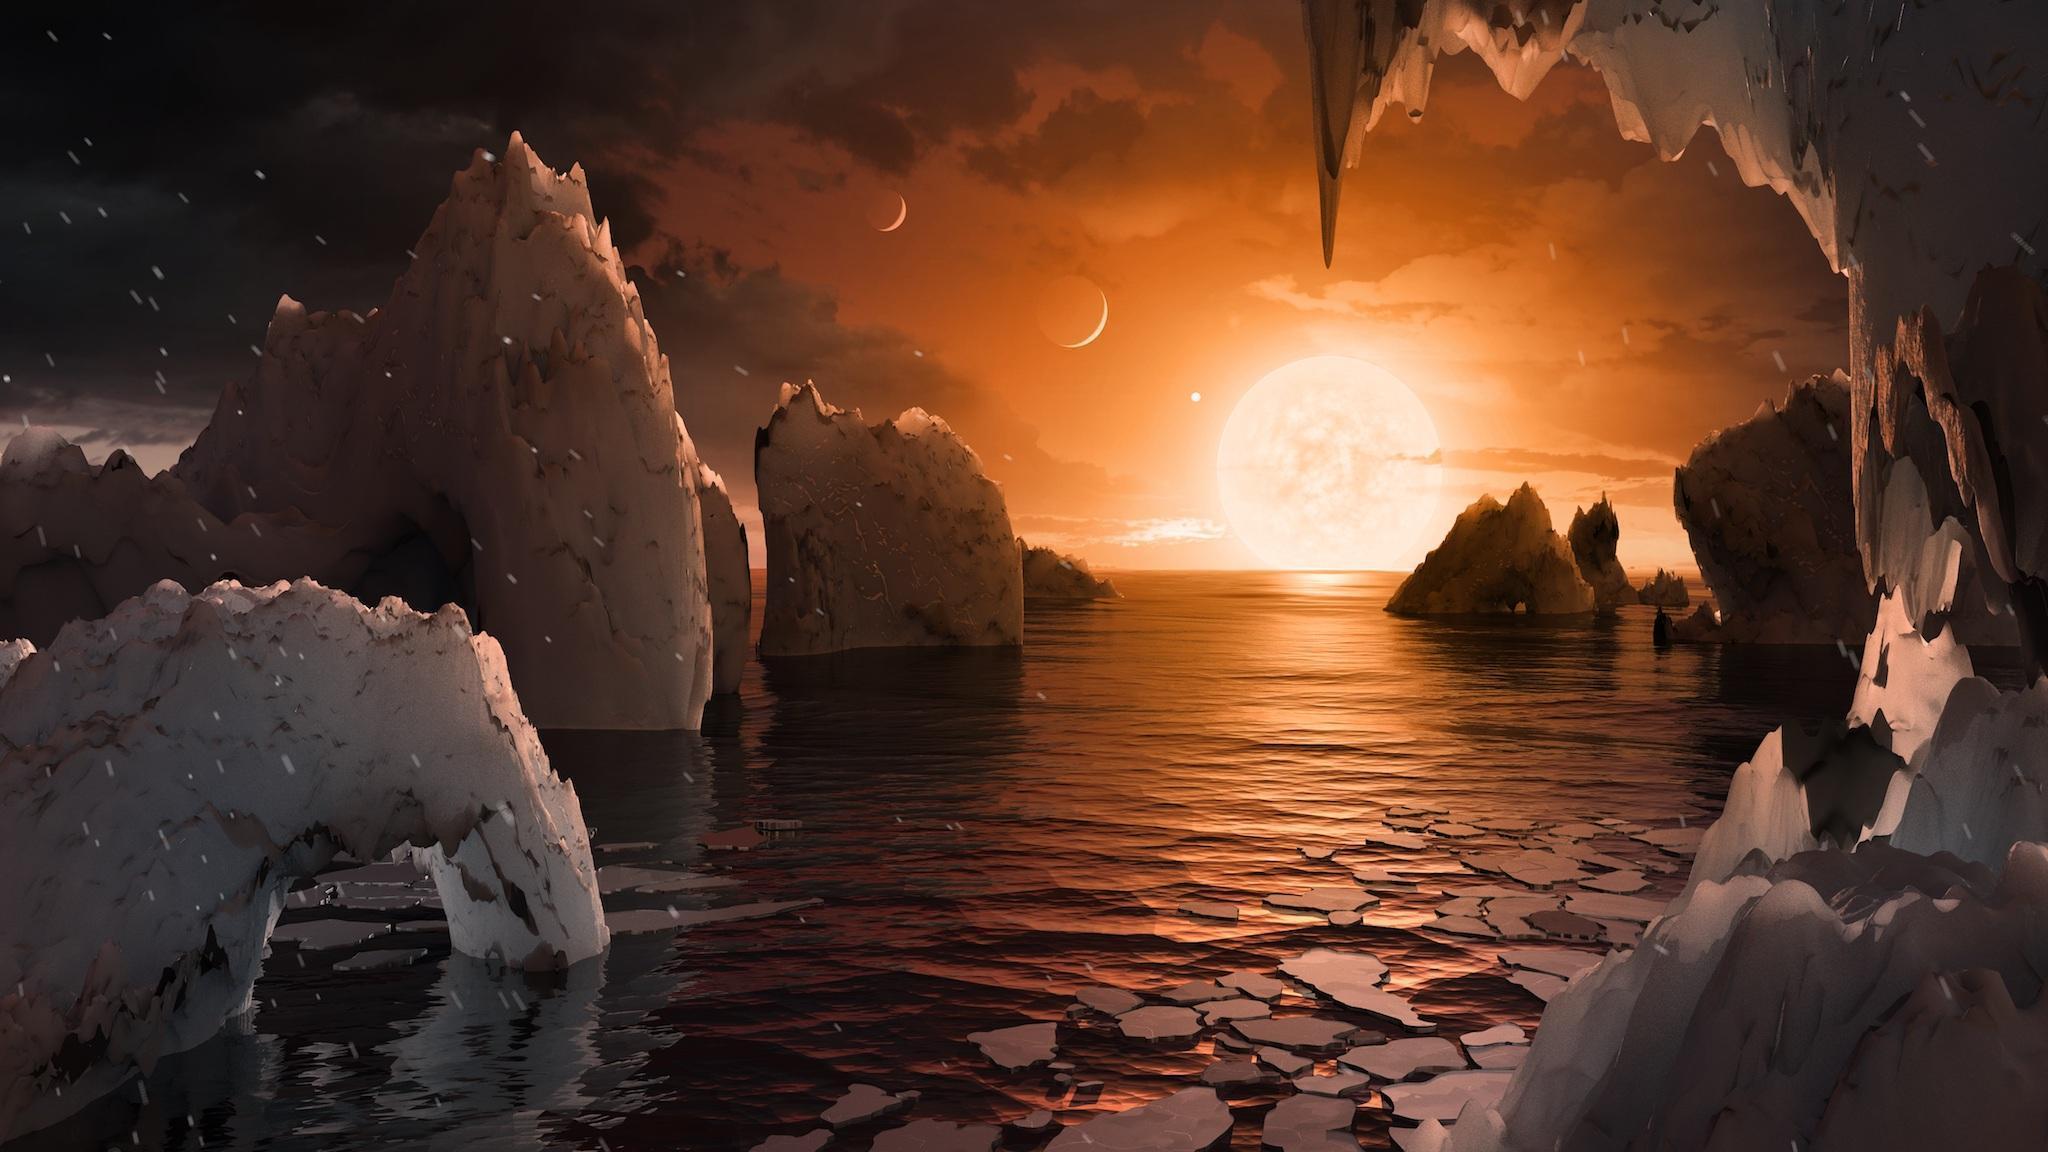 An artists' conception of a planet in the Trappist-1 system, which prompted the new study